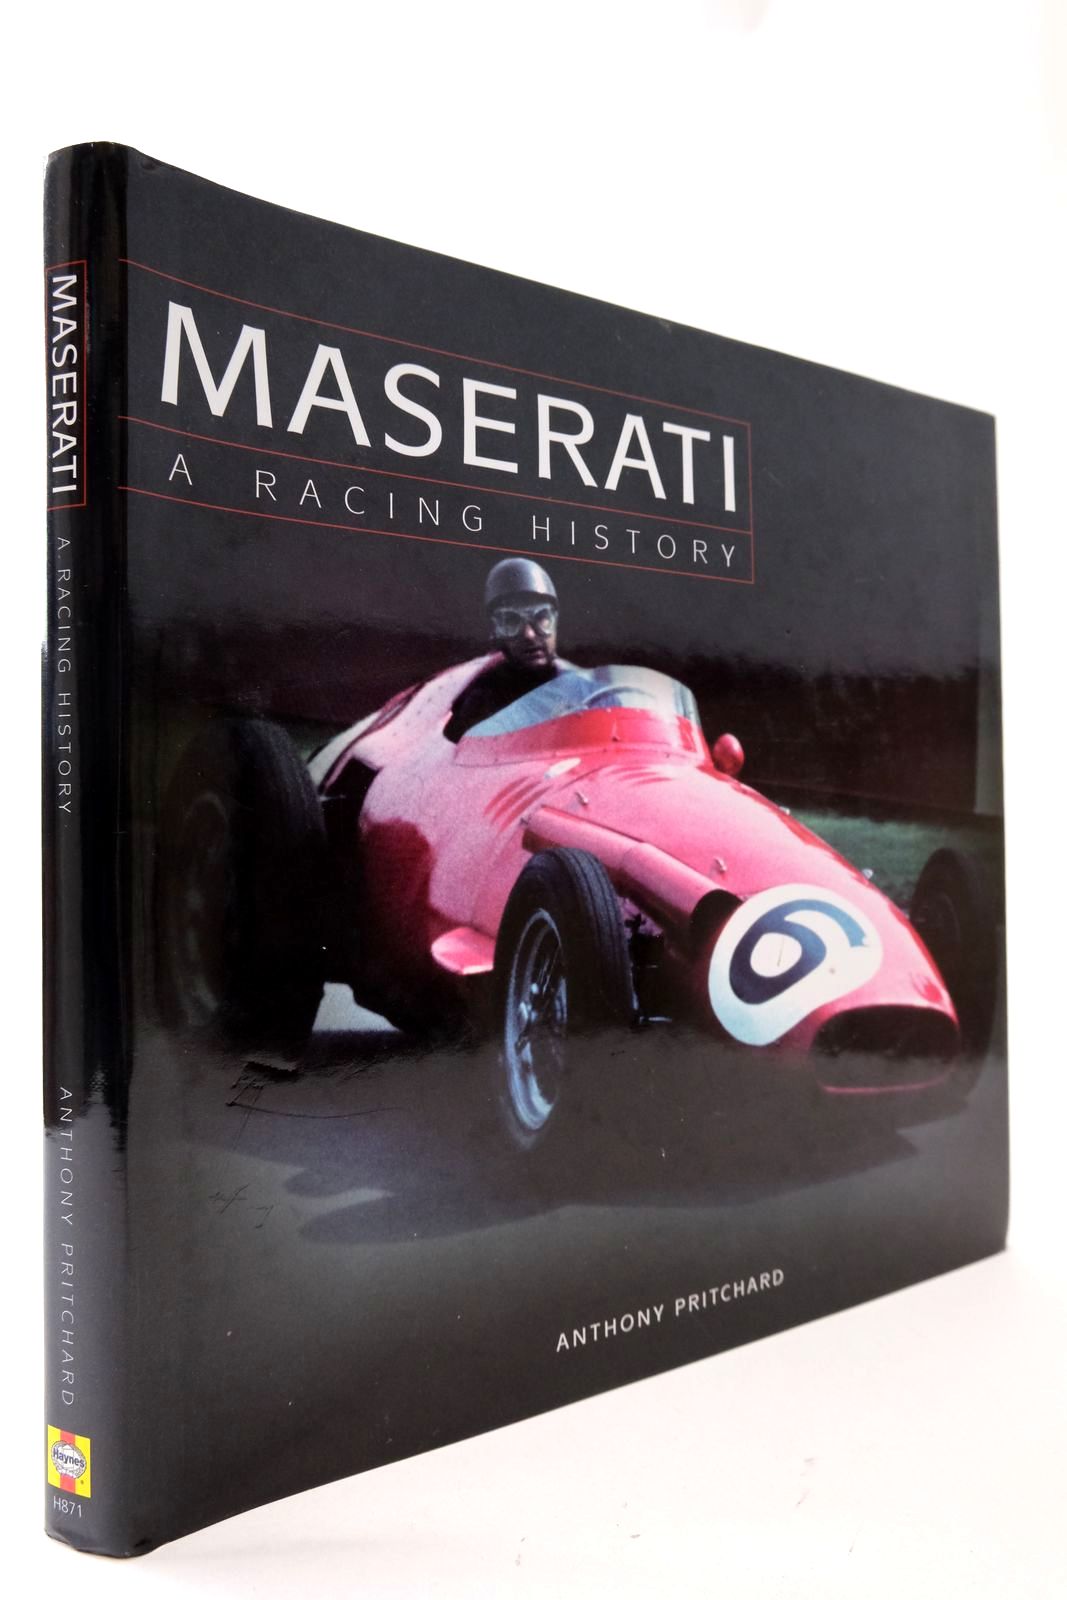 Photo of MASERATI A RACING HISTORY written by Pritchard, Anthony published by Haynes Publishing (STOCK CODE: 2132917)  for sale by Stella & Rose's Books